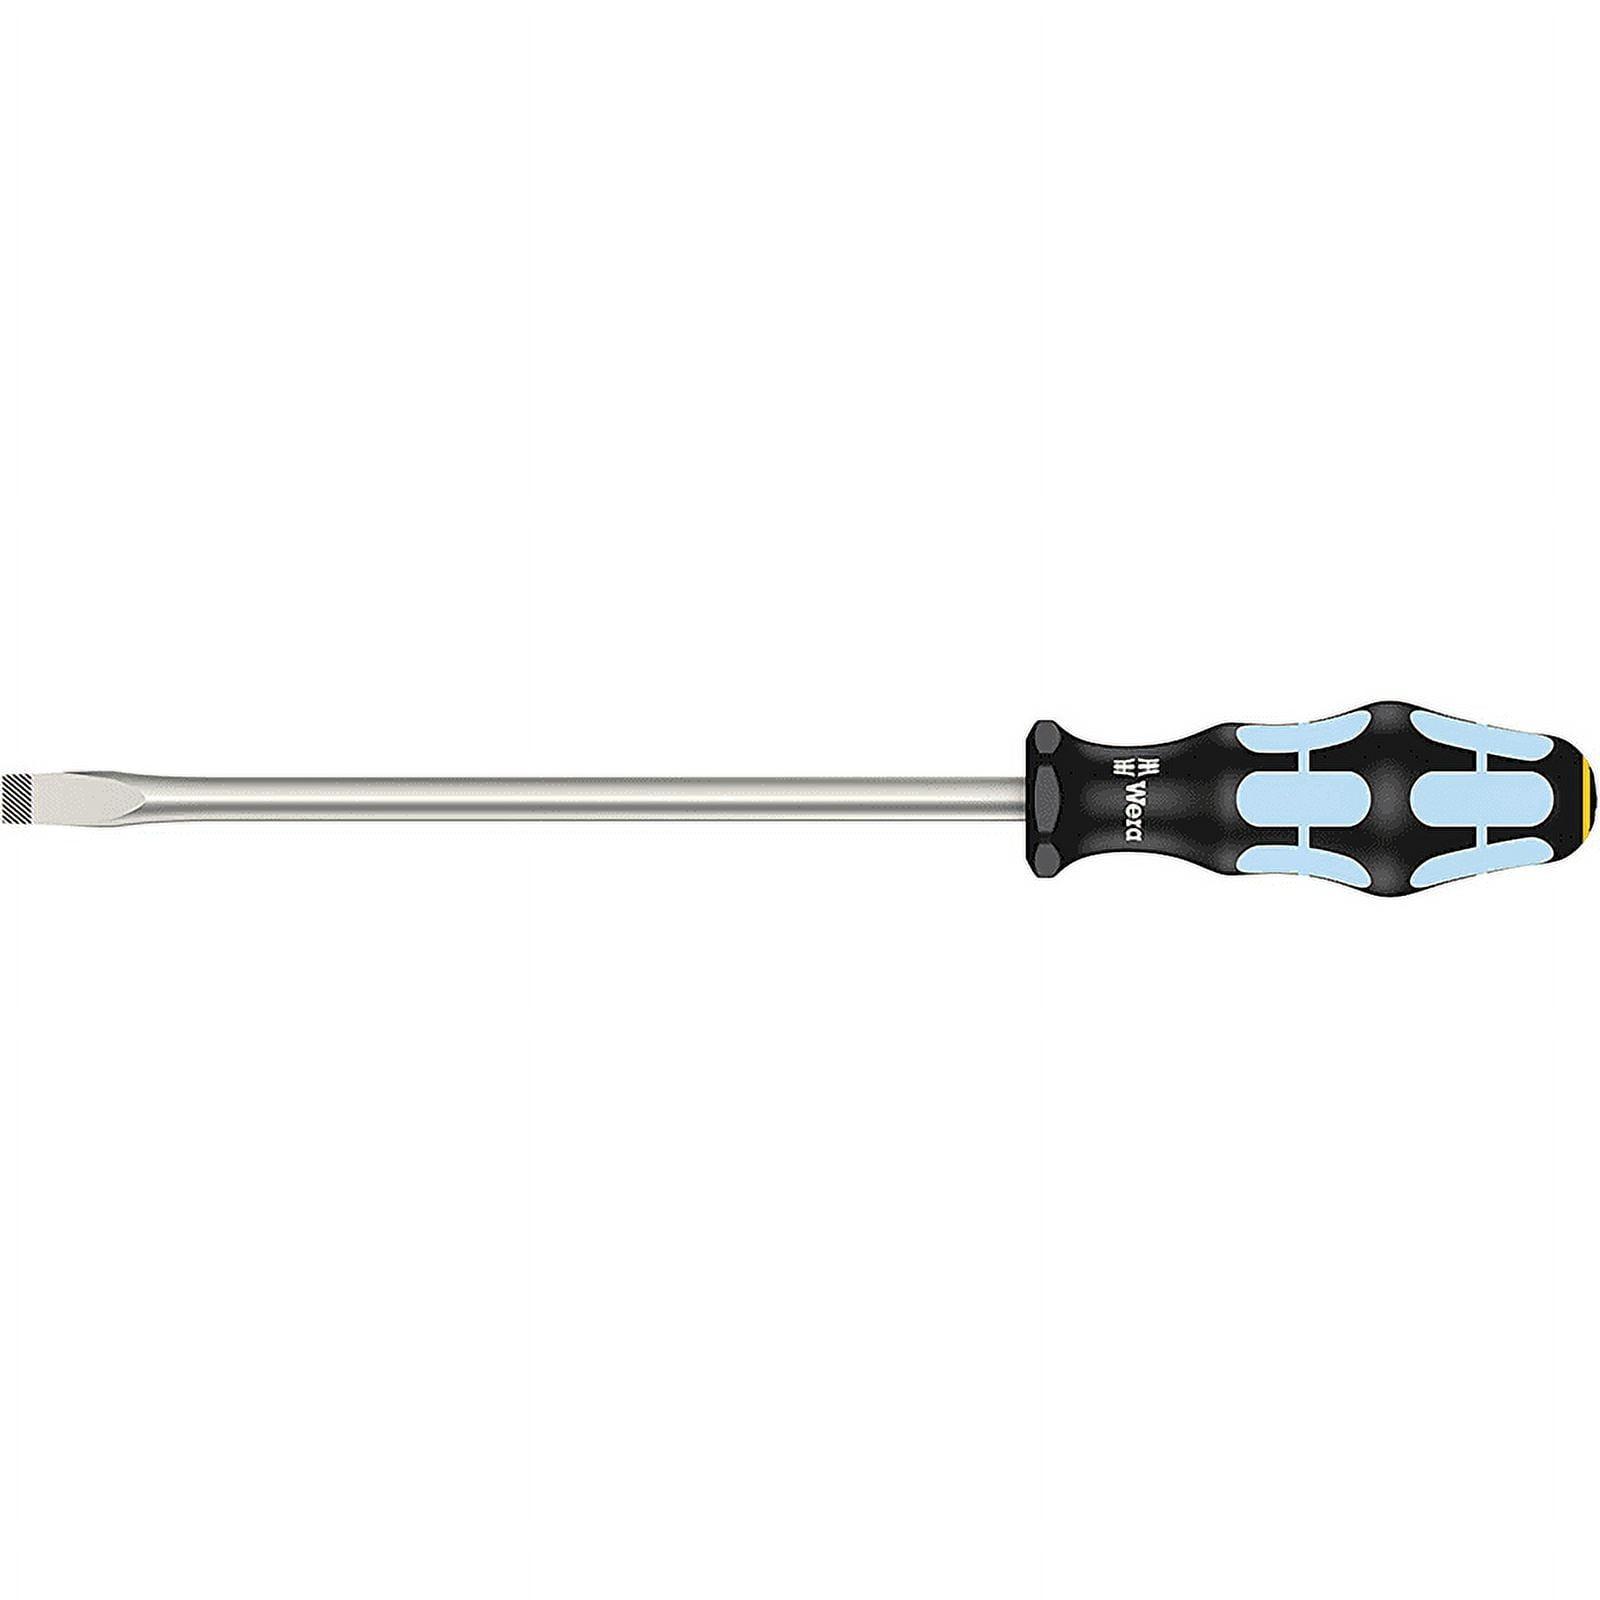 Wera 05032020001 0 x 60mm Stainless Steel Phillips Screwdriver, without  Lasertip 